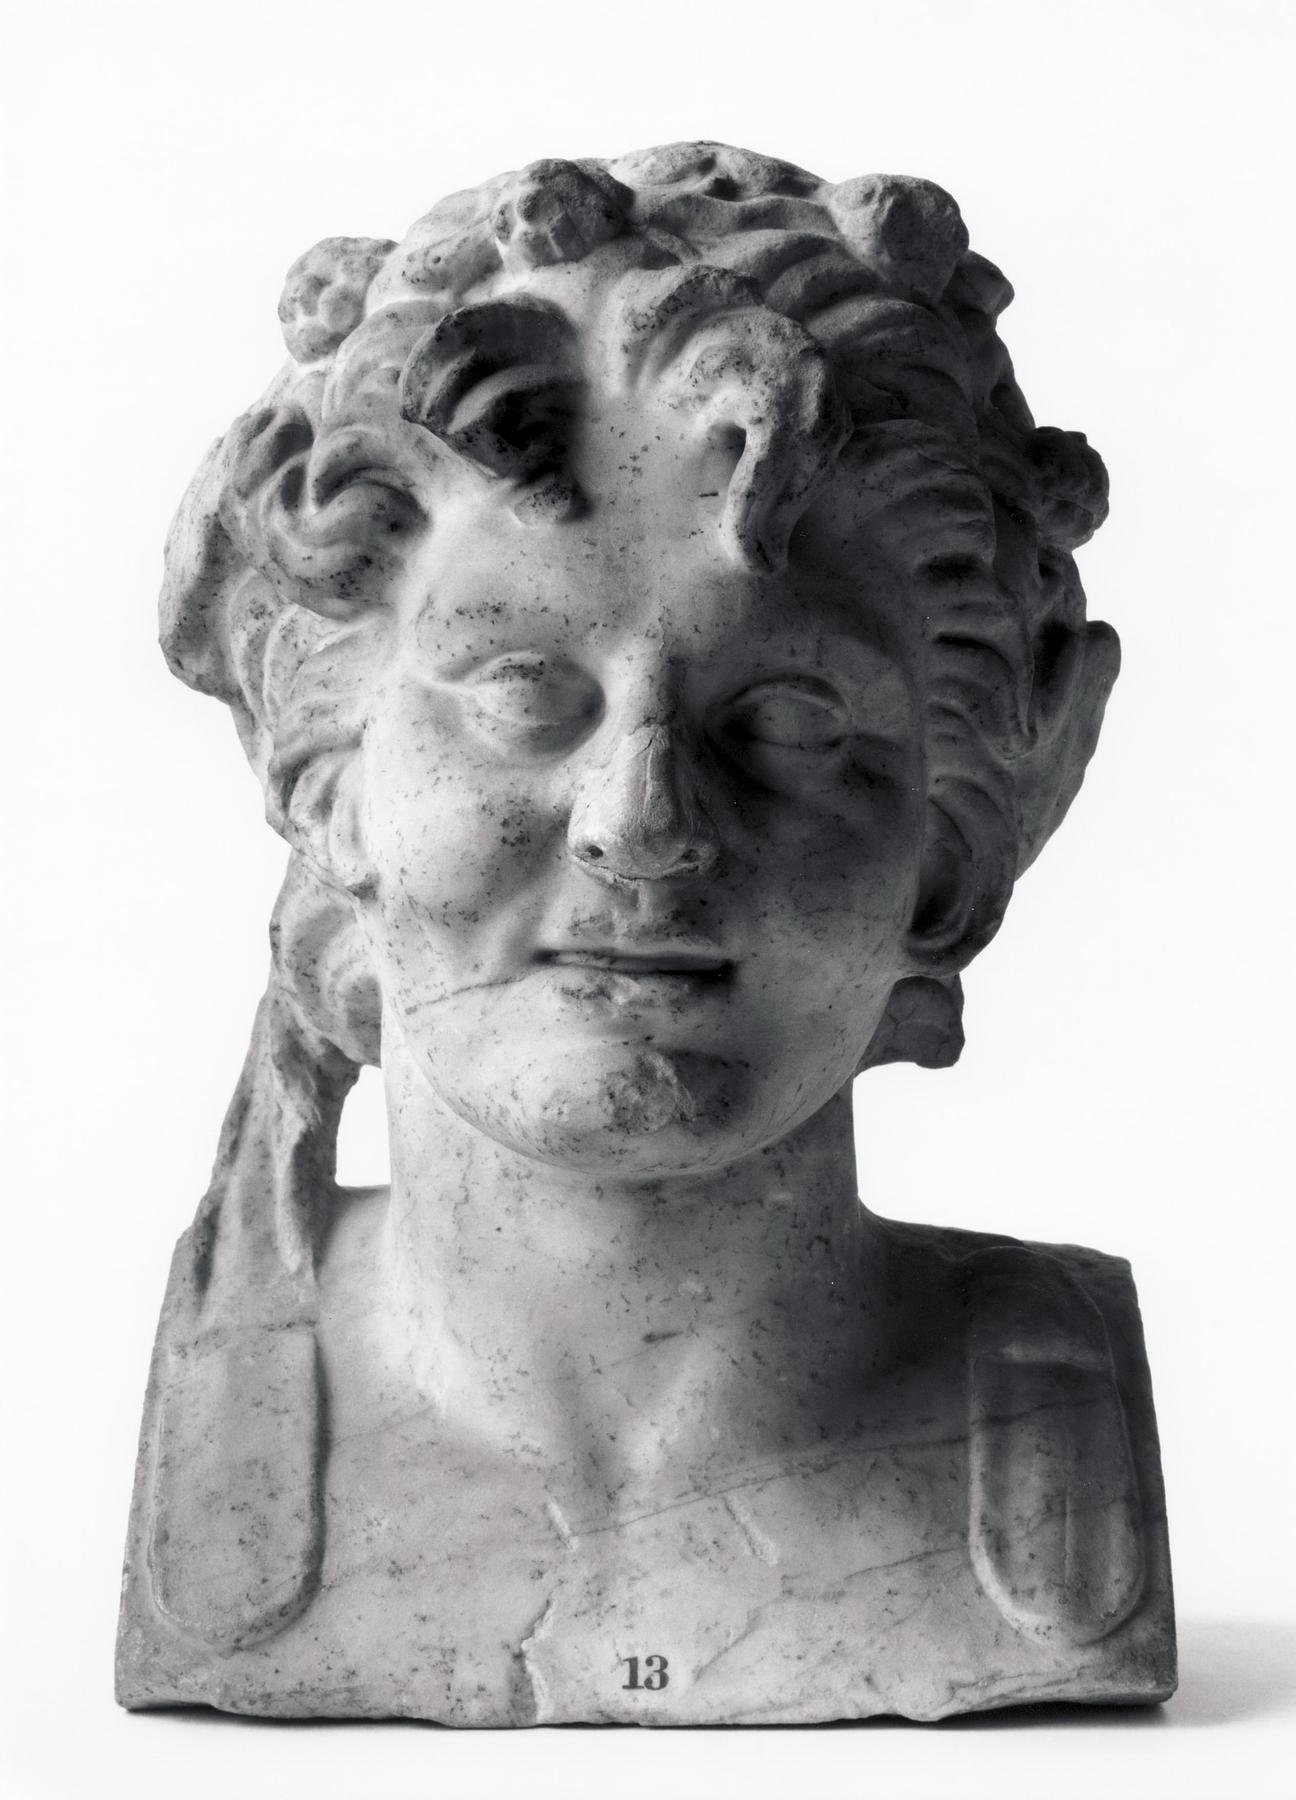 Herm of a young satyr, H1413